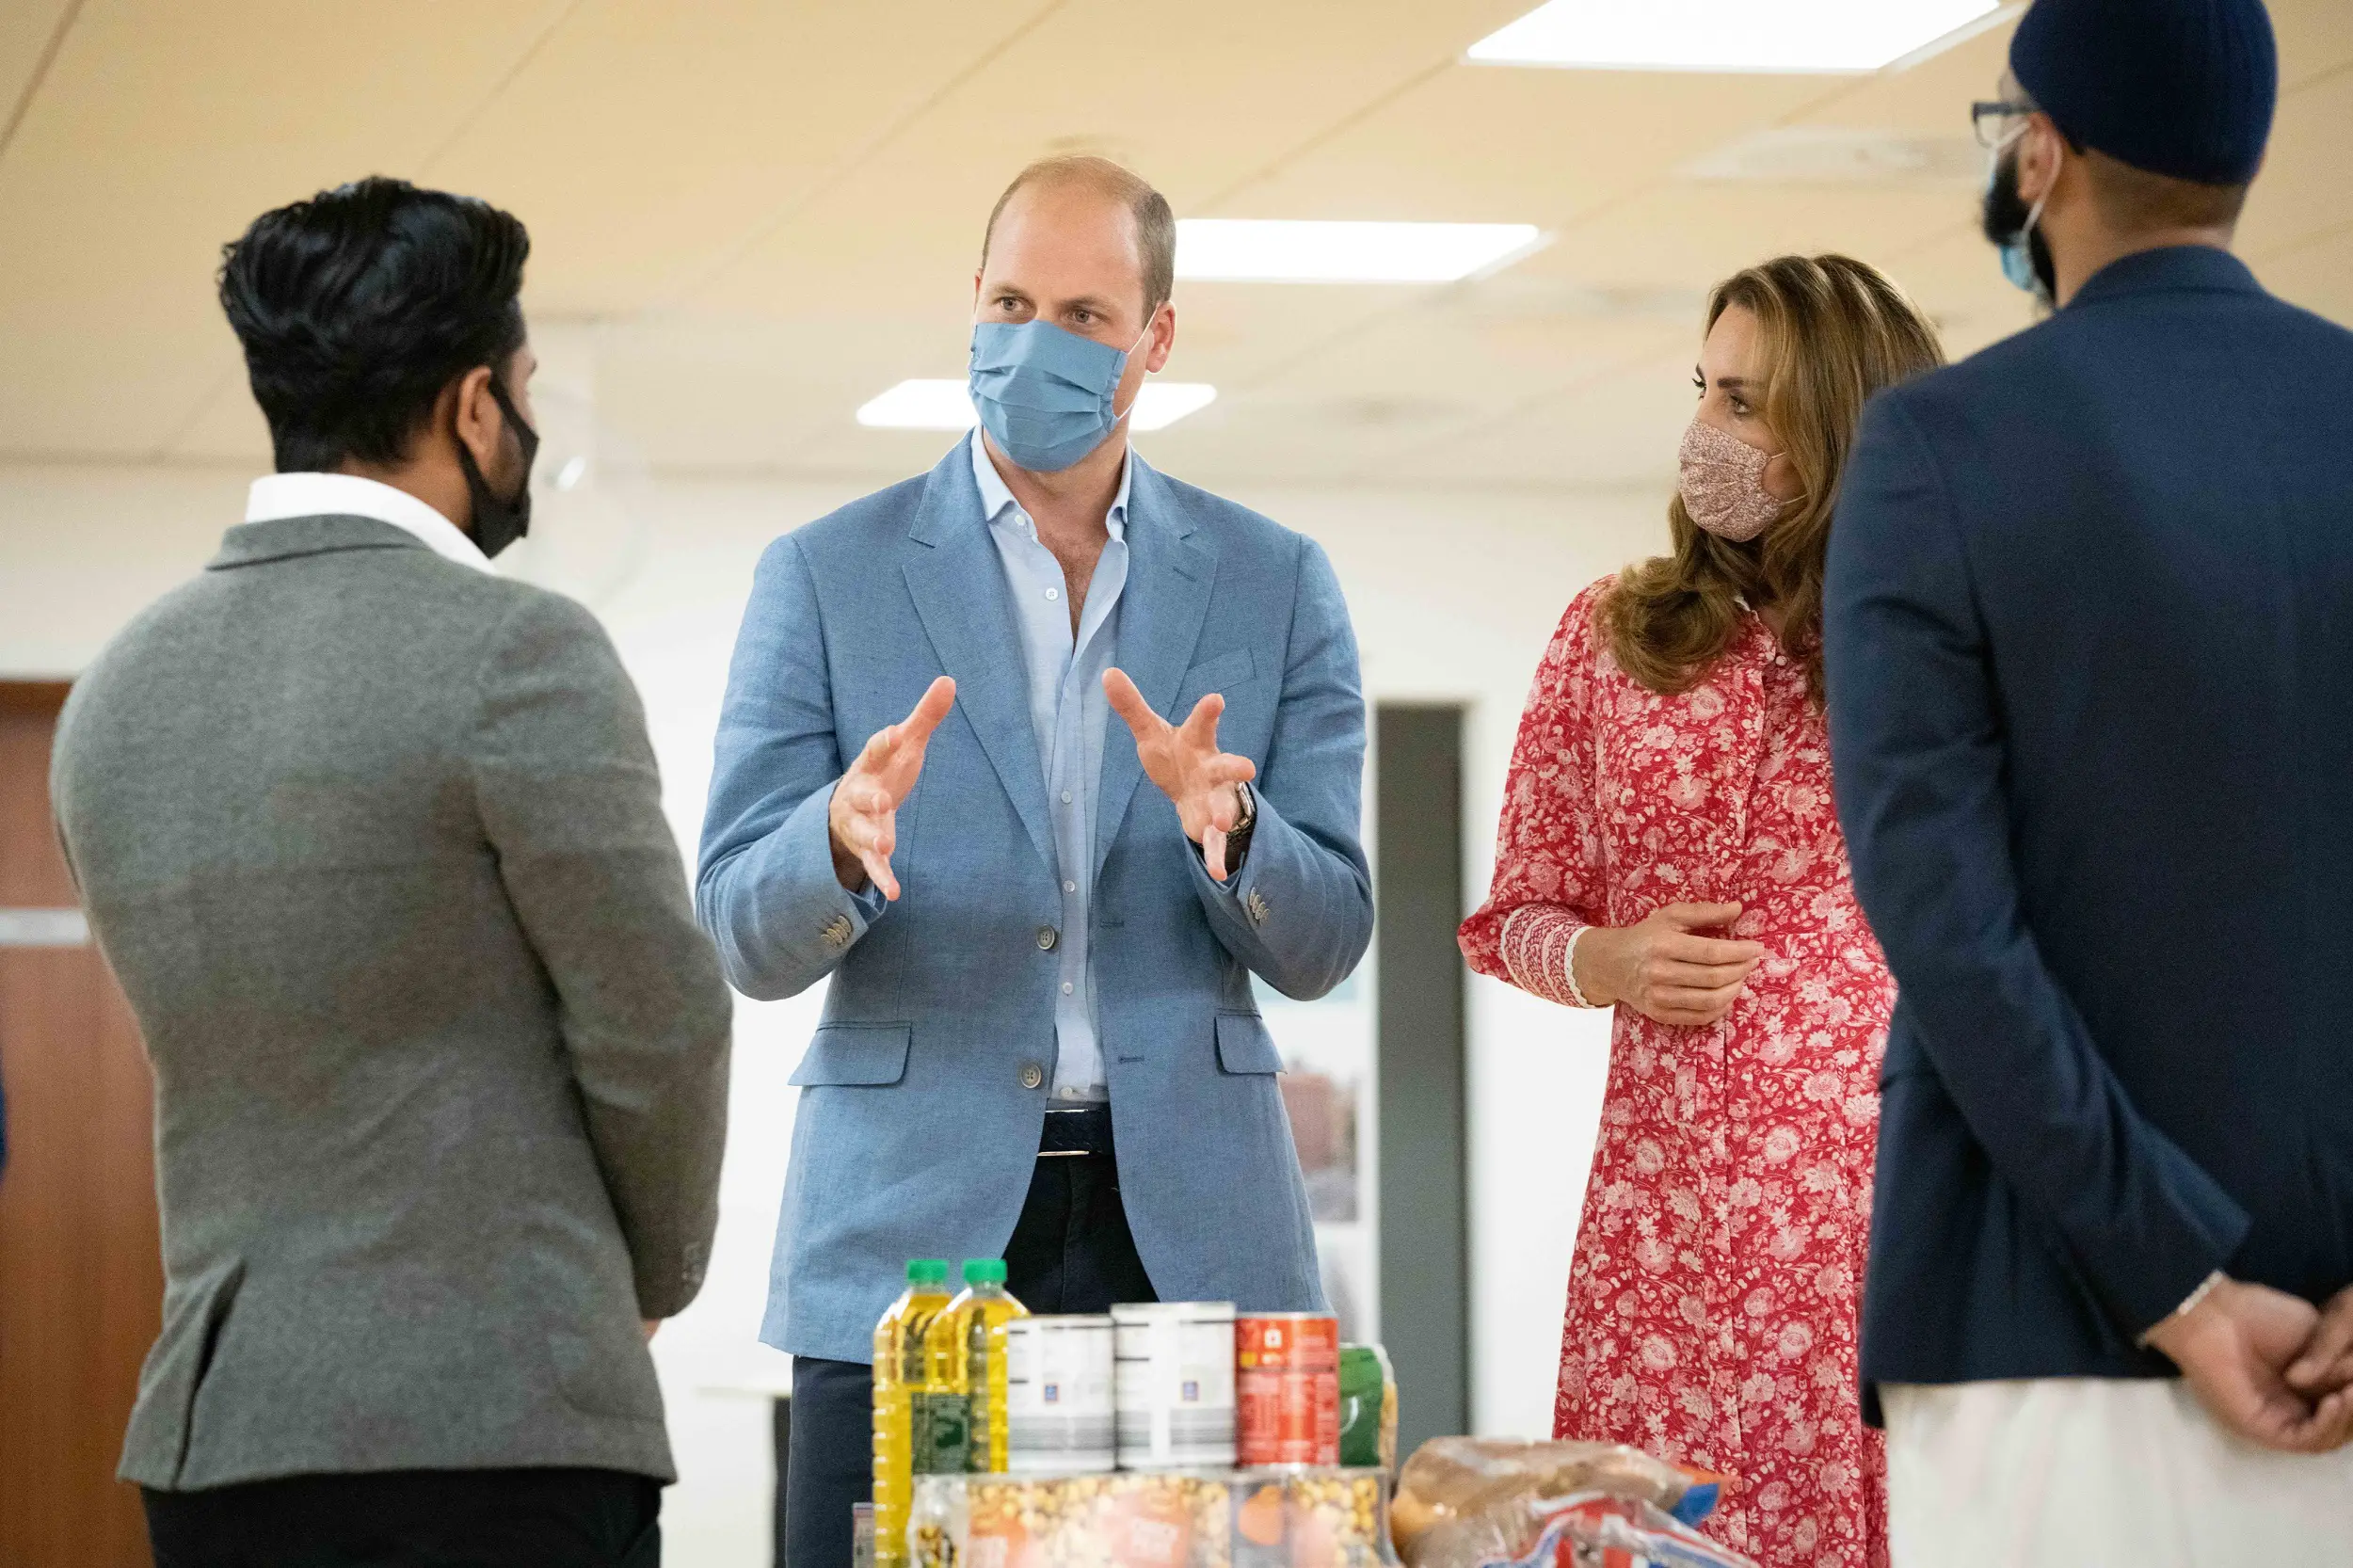 The Duke and Duchess of Cambridge thanked the Muslim community for their help during COVID-19